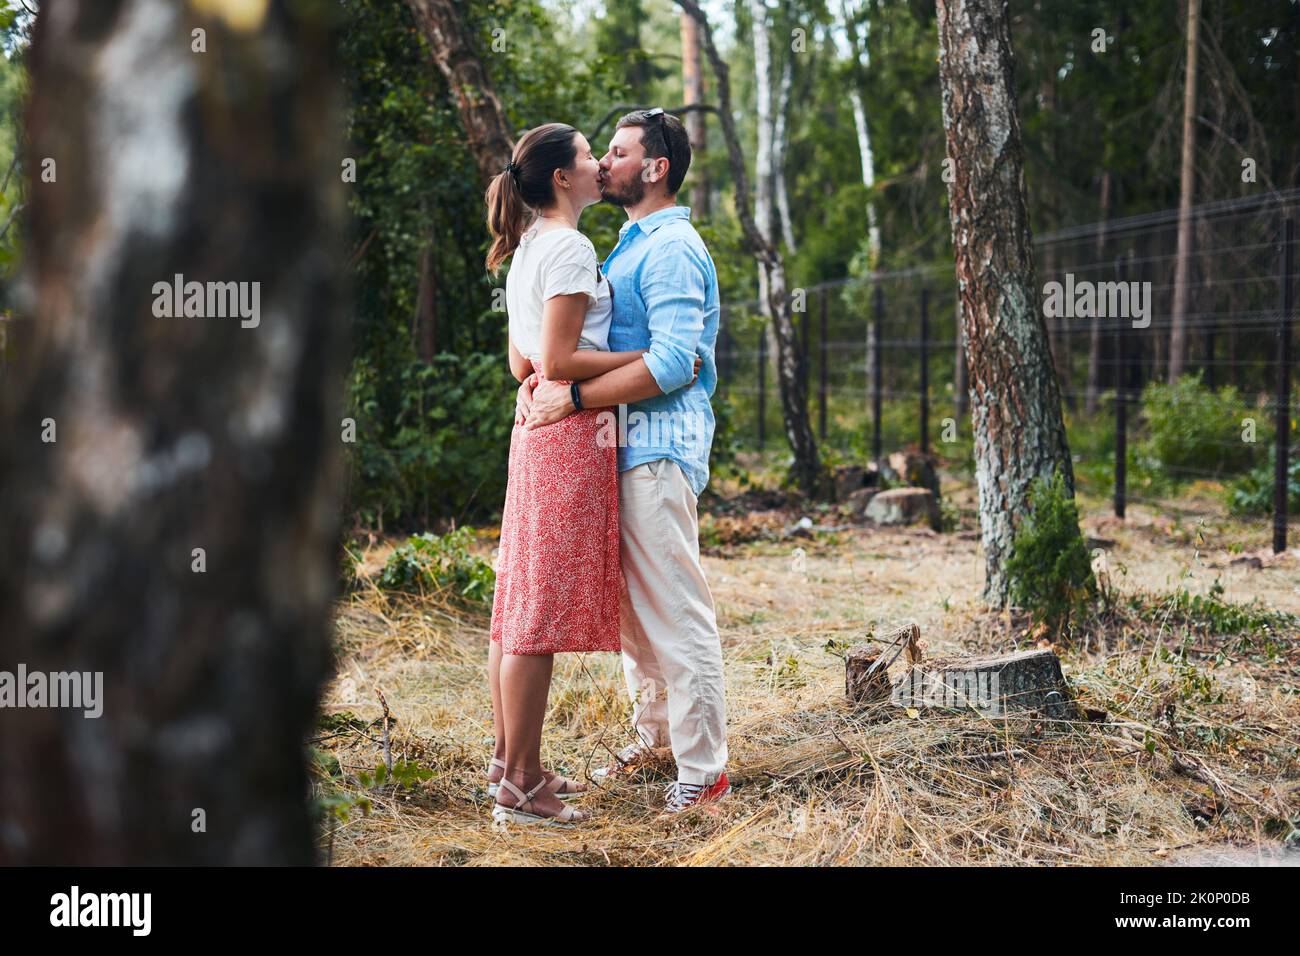 Portrait of a young couple kissing on a date in the woods. Front view. Stock Photo